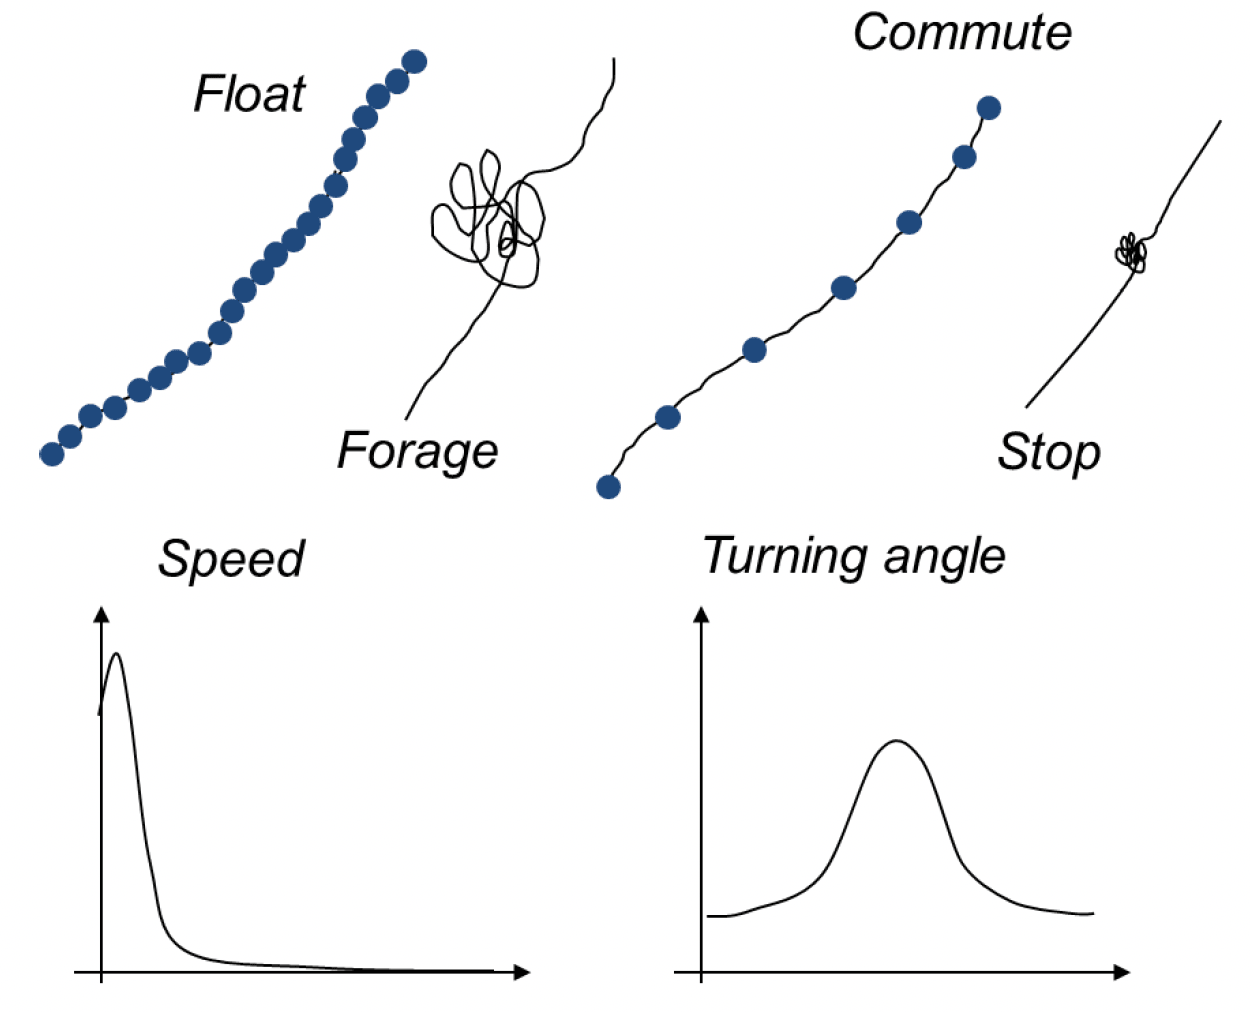 Illustration of how speed and turning angle are used to classify behaviour from GPS tracks.